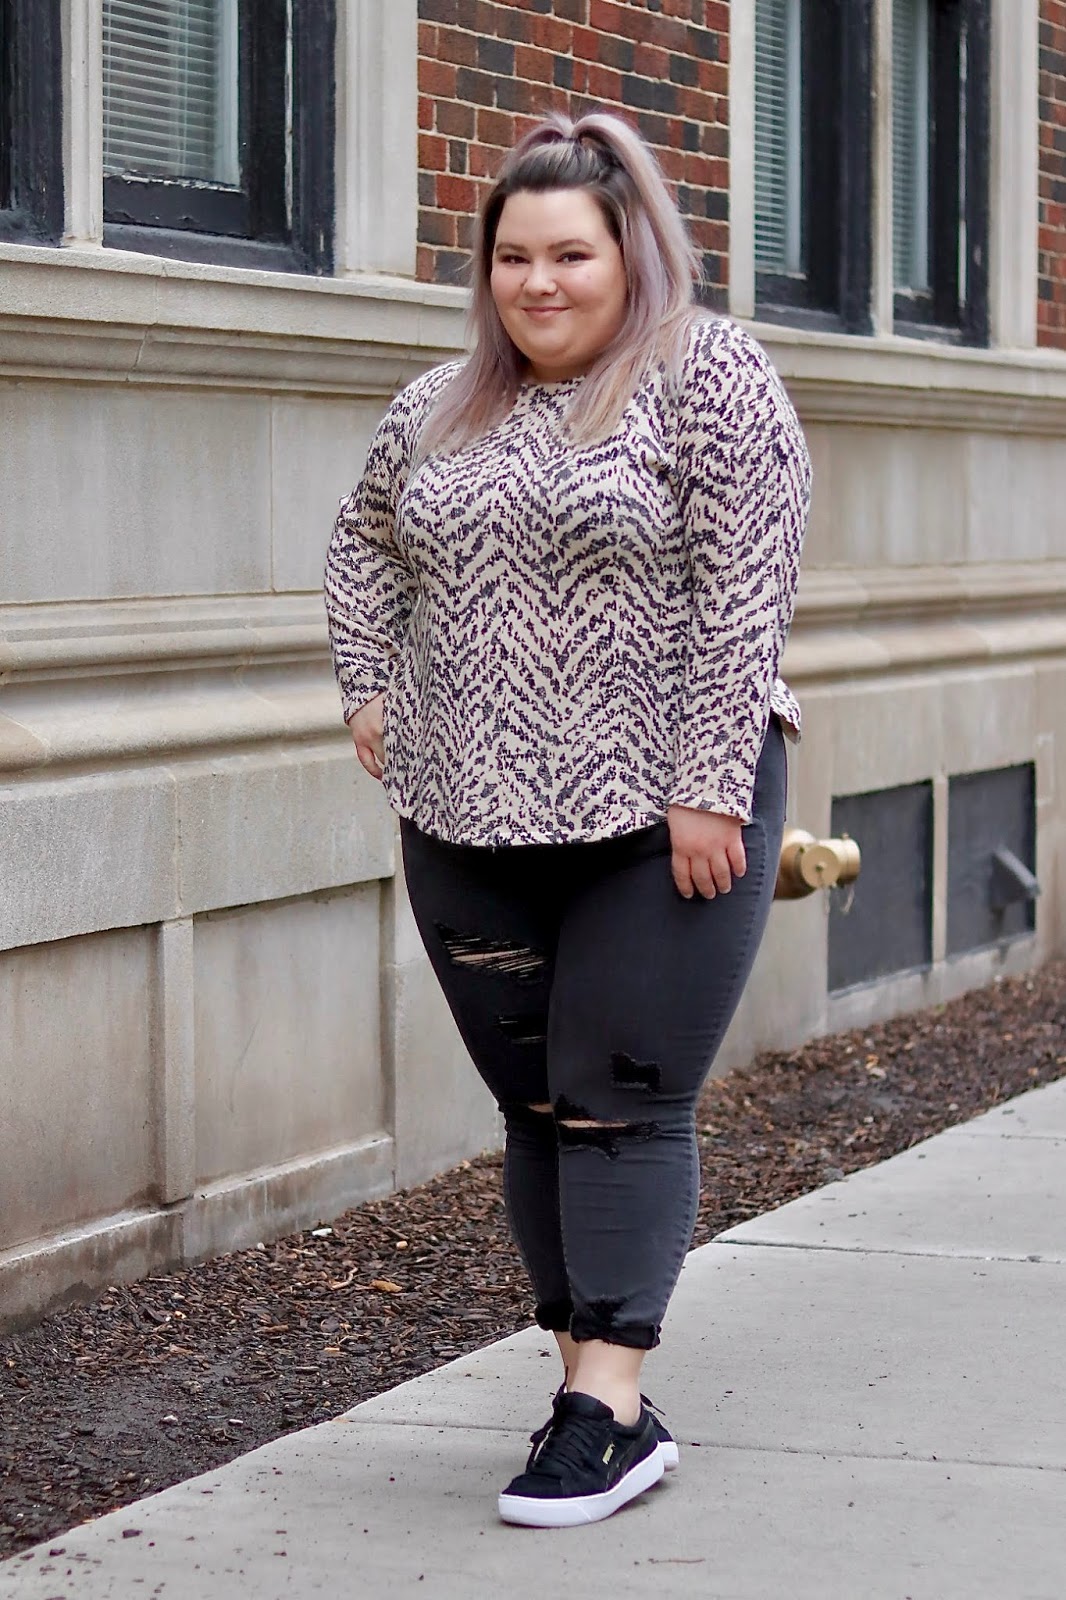 Plus size fashion blogger, model, and YouTuber Natalie Craig shares her favorite summer and spring styles from Gordmans, which just opened 38 new stores!